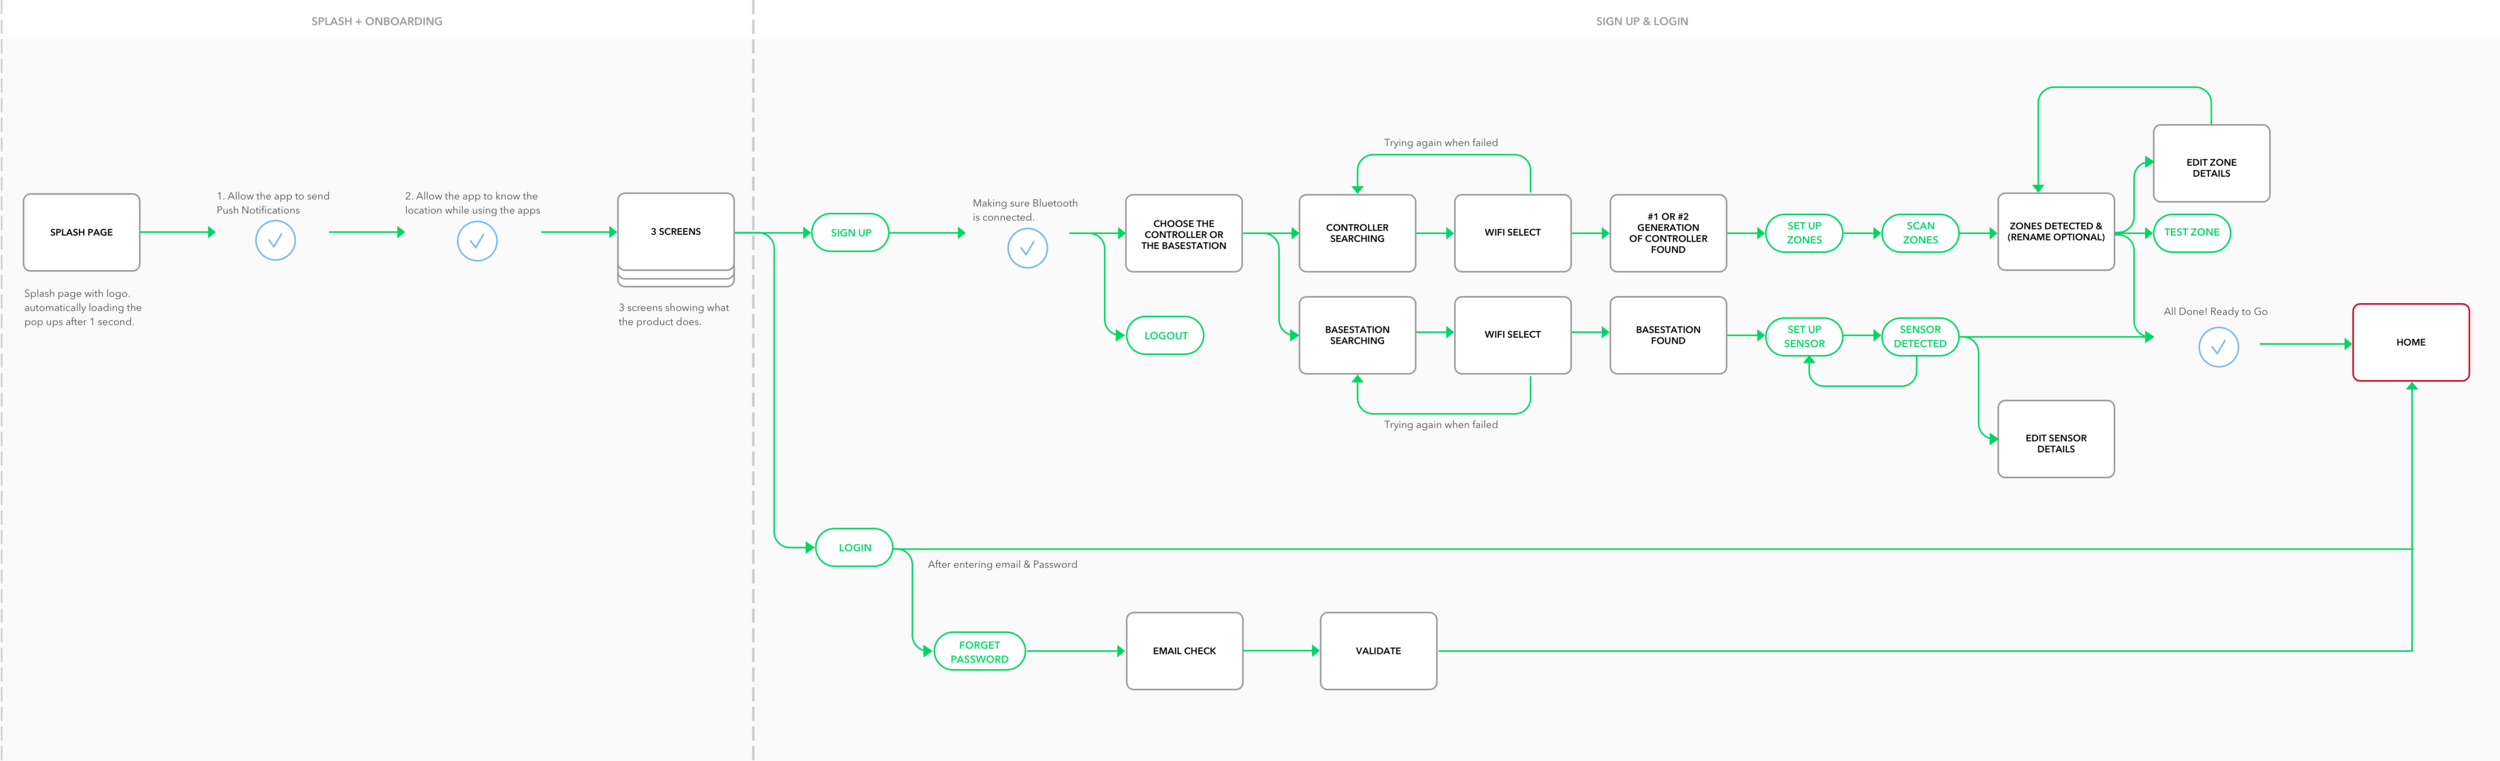 Onboarding_Flow_Chart.png